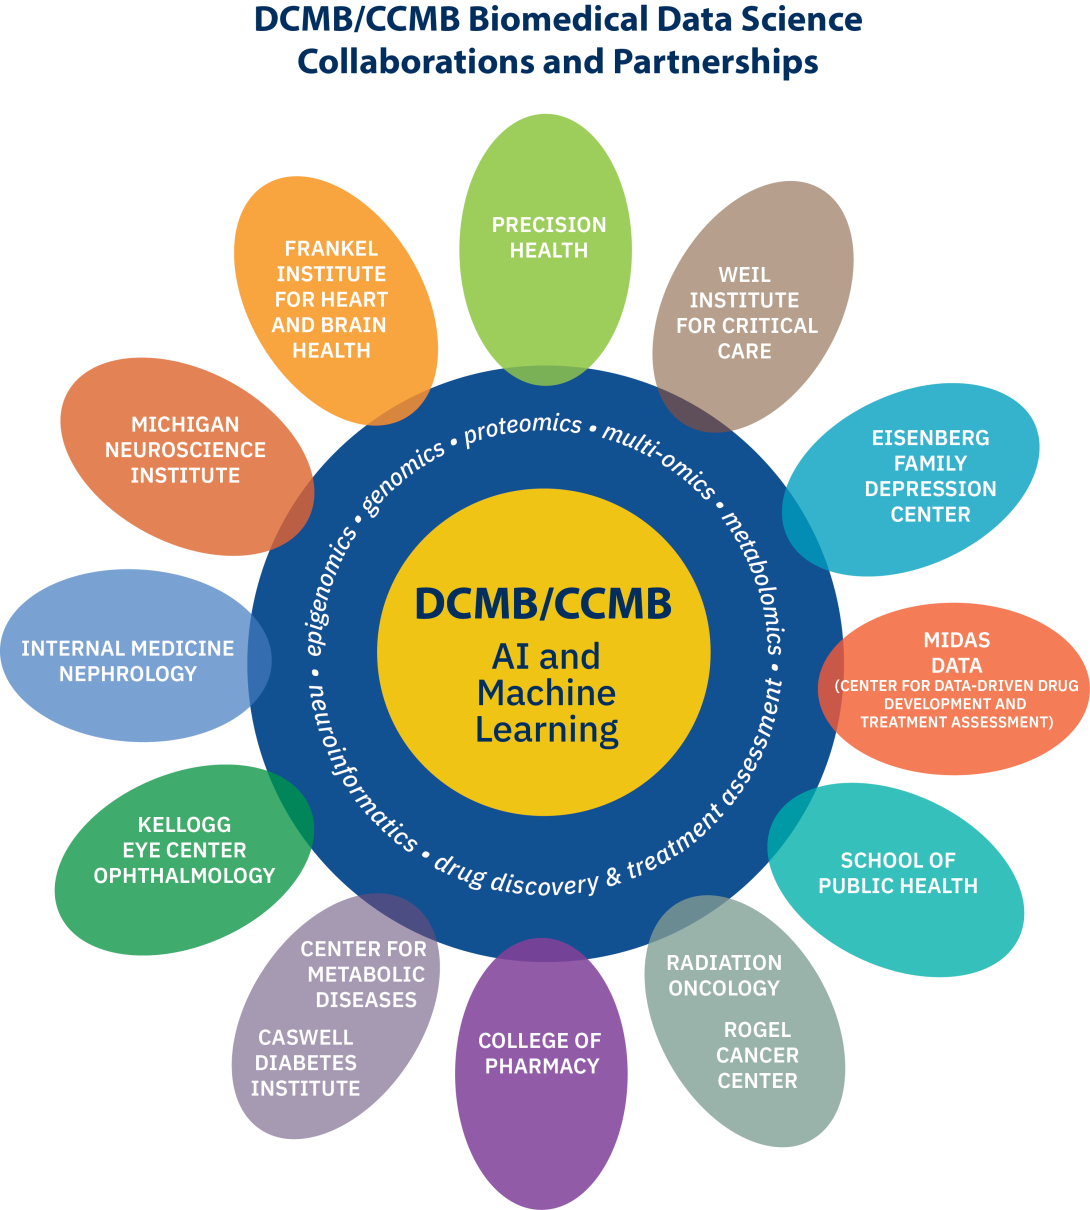 Venn diagram illustrating the interdisciplinary nature of dcmb/ccmb machine learning within various biomedical and research sectors at an academic institution.